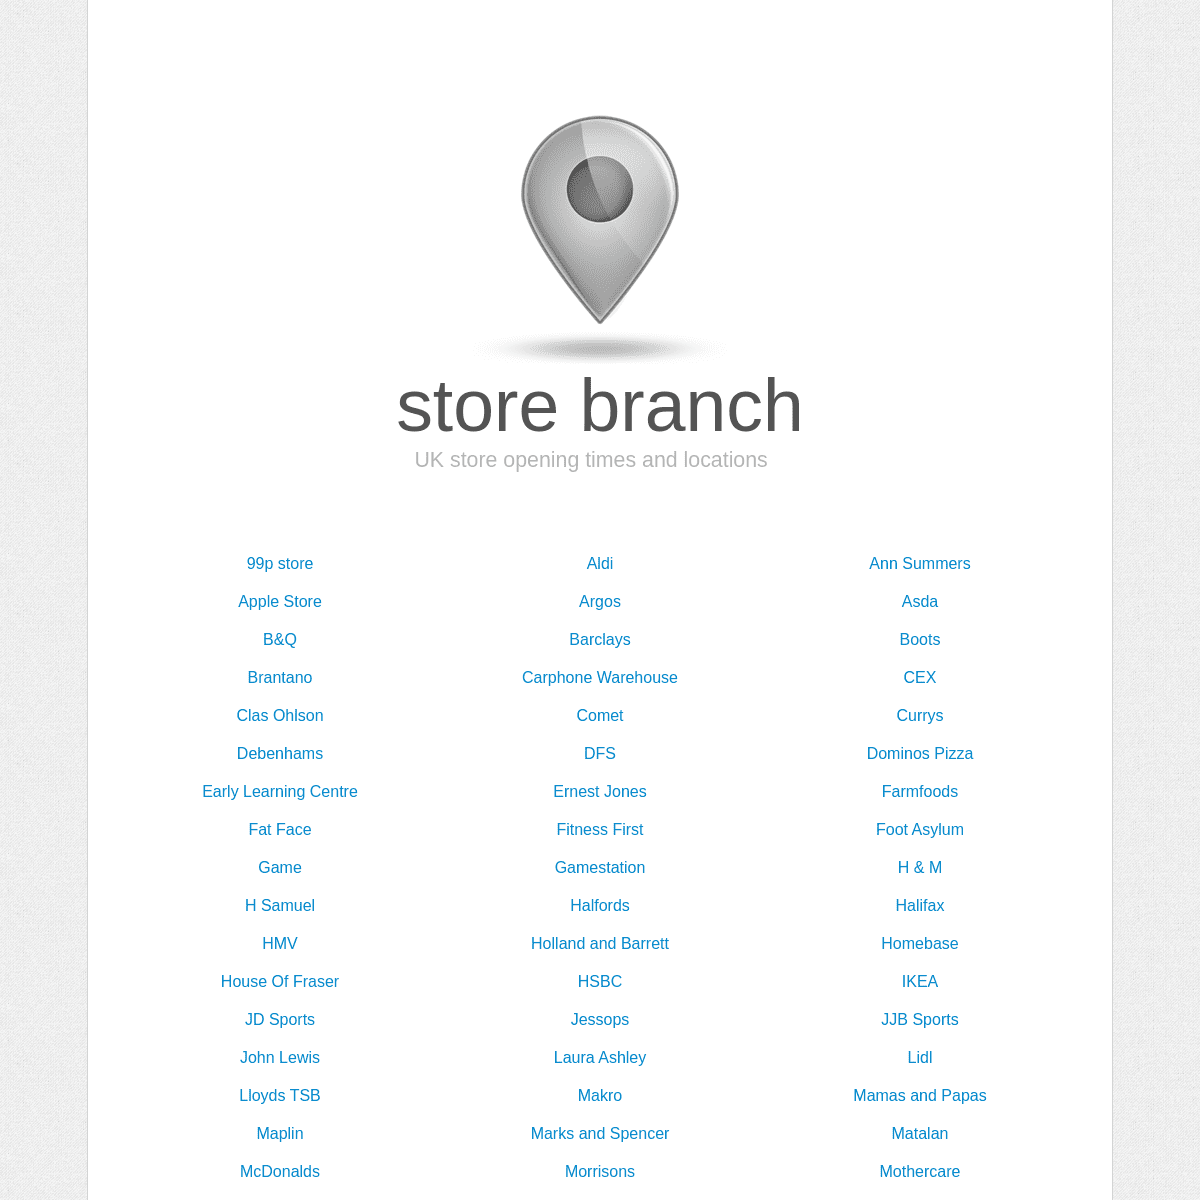 A complete backup of storebranch.com